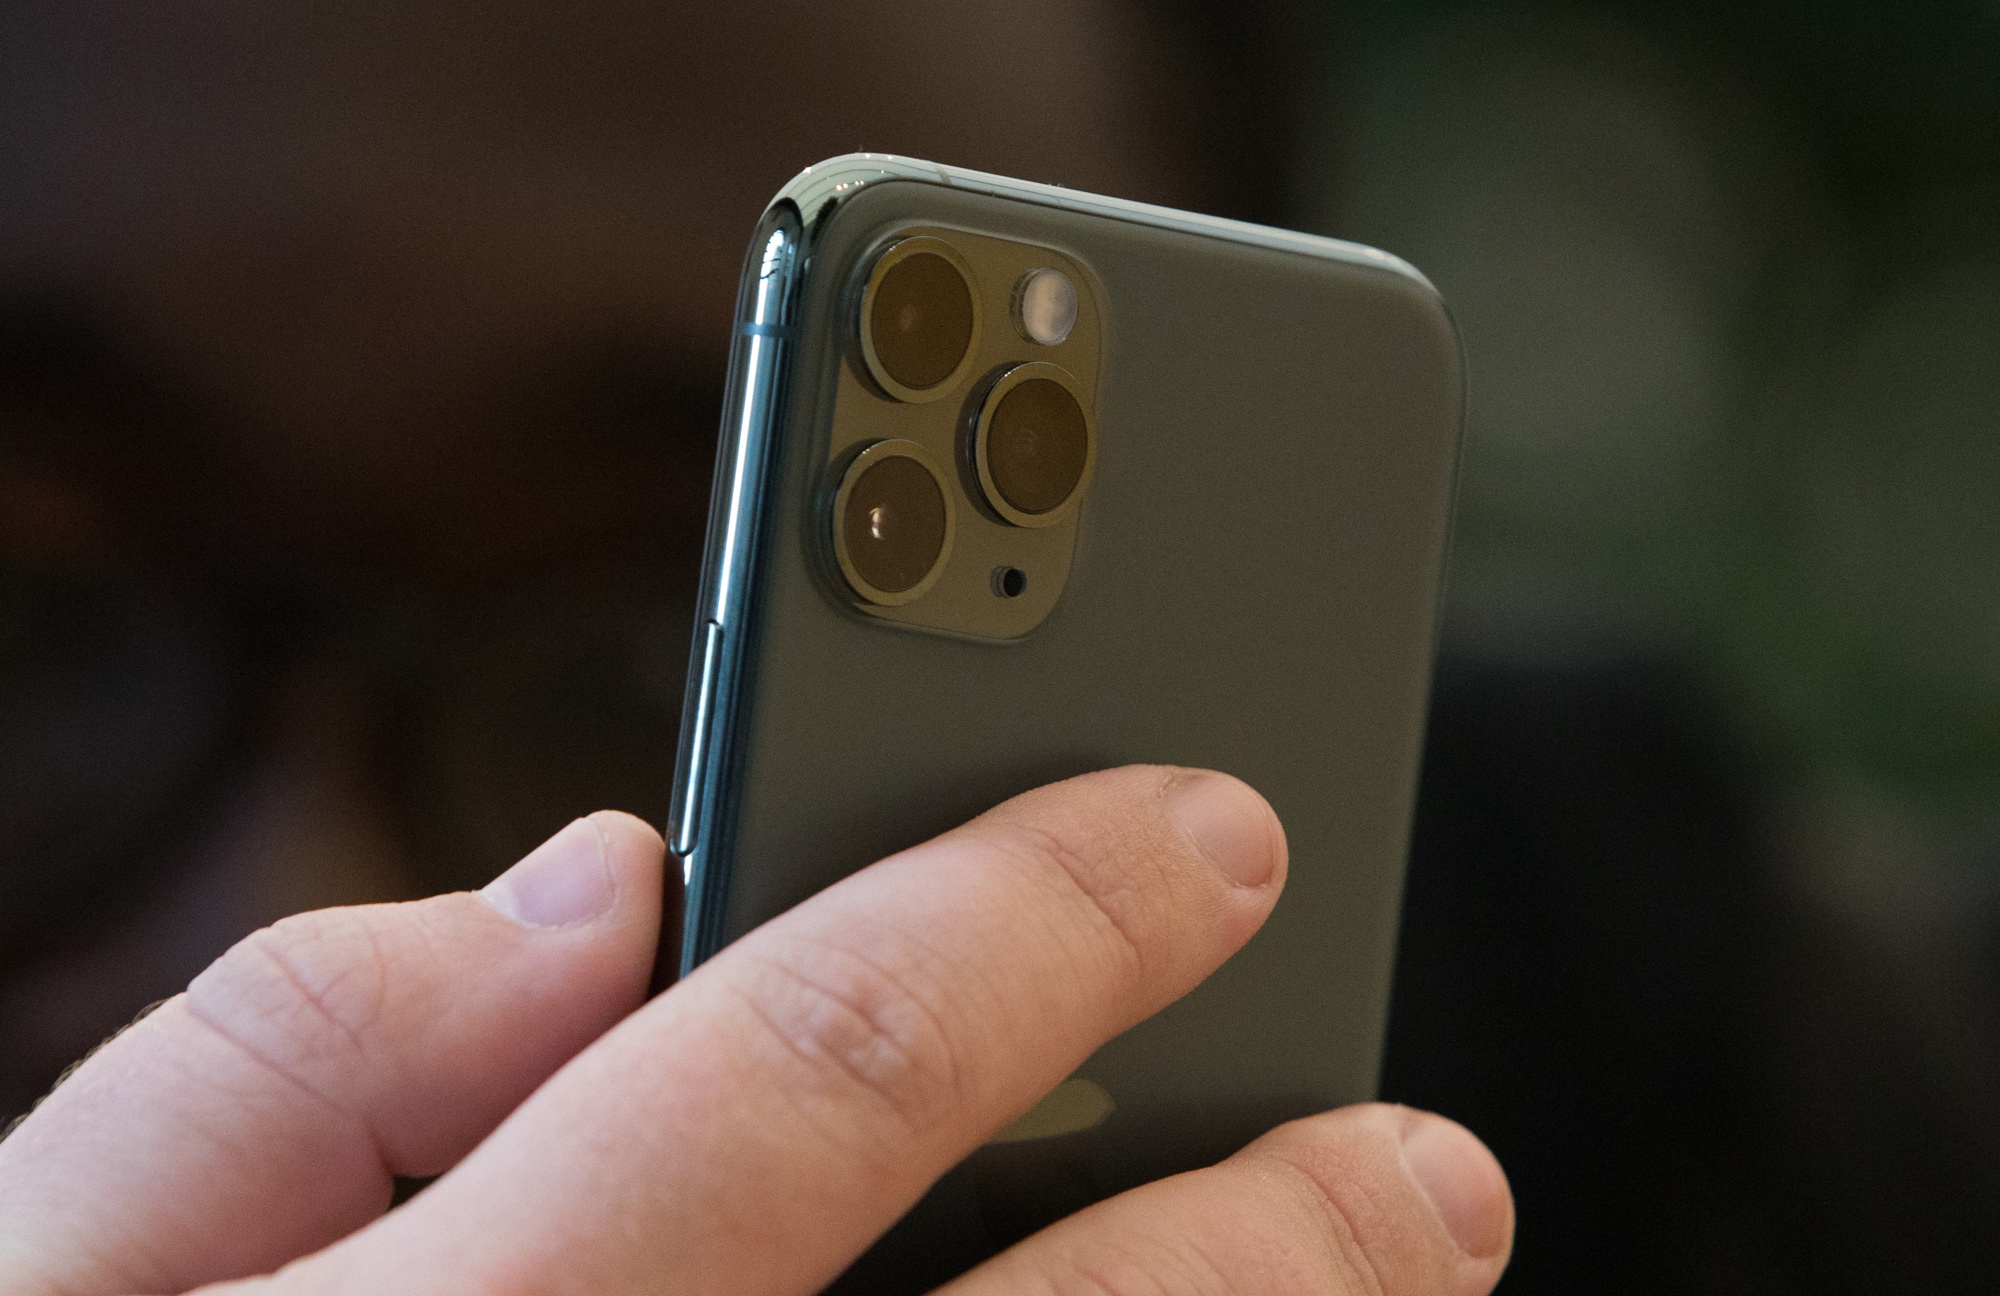 Triple‑camera lenses on the rear casing of an Apple Inc. iPhone 11 Pro.